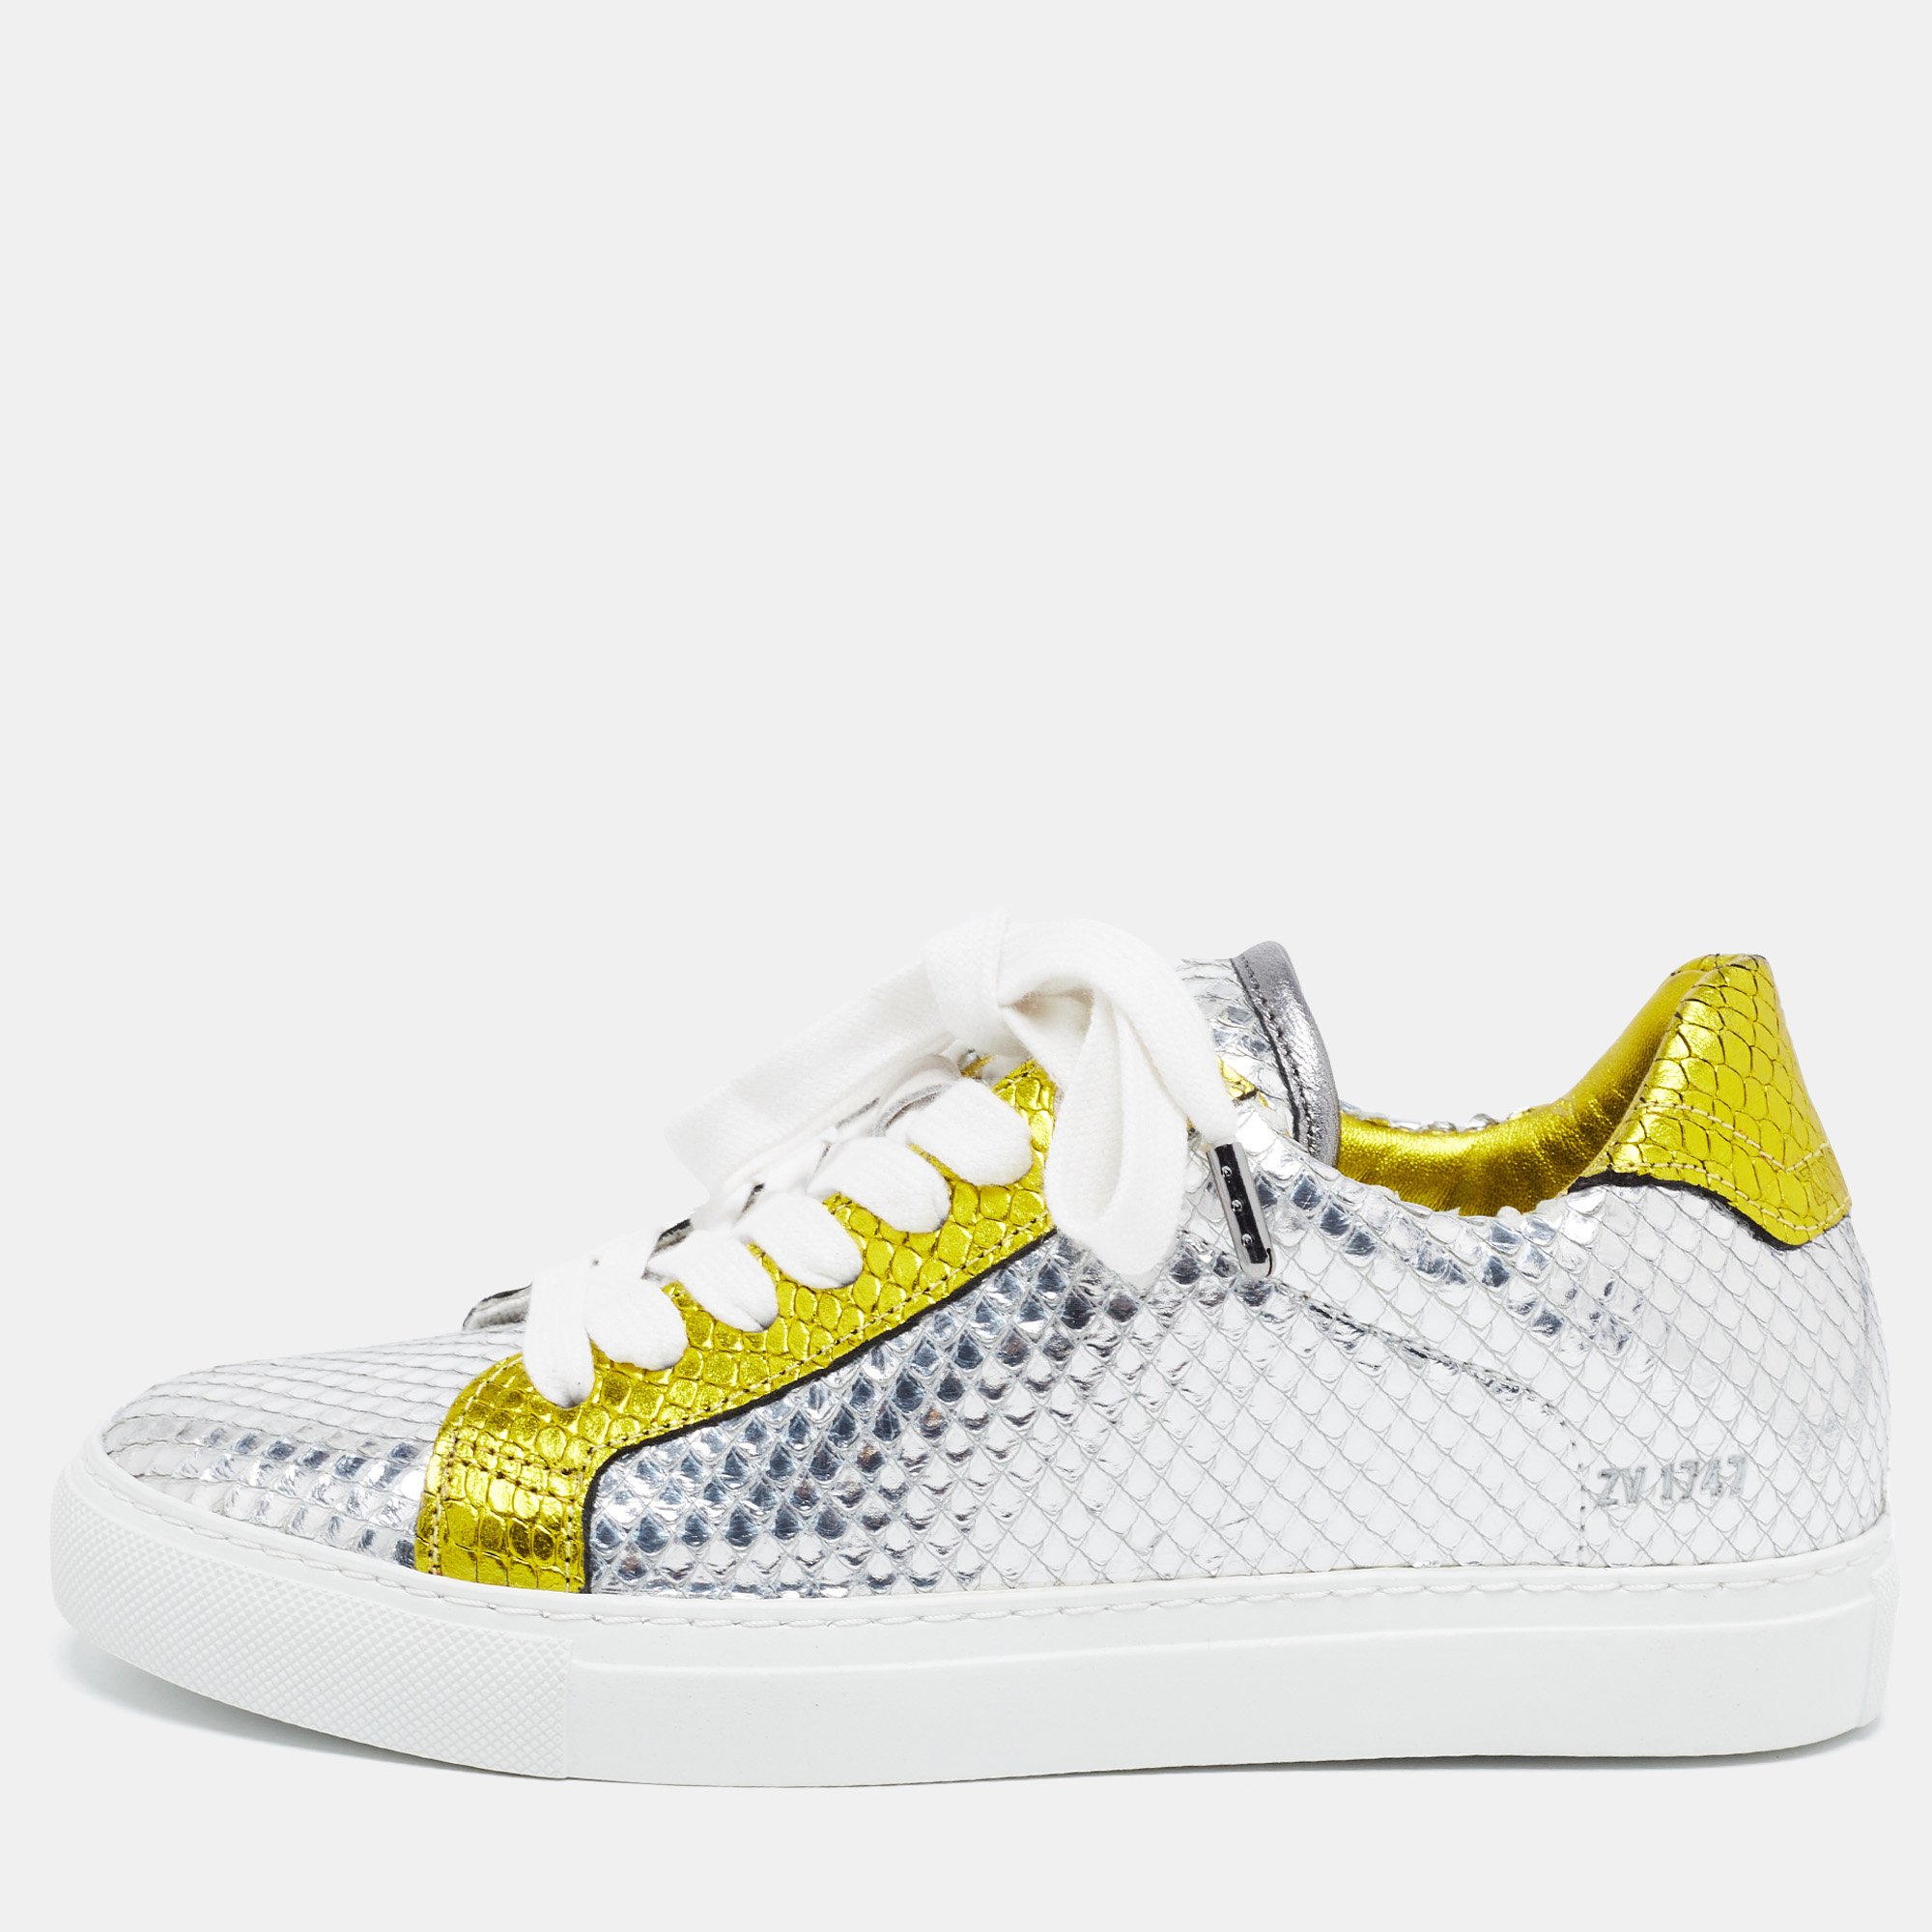 Zadig & Voltaire Silver/Gold Python Embossed Leather Low Top Sneakers Size 36